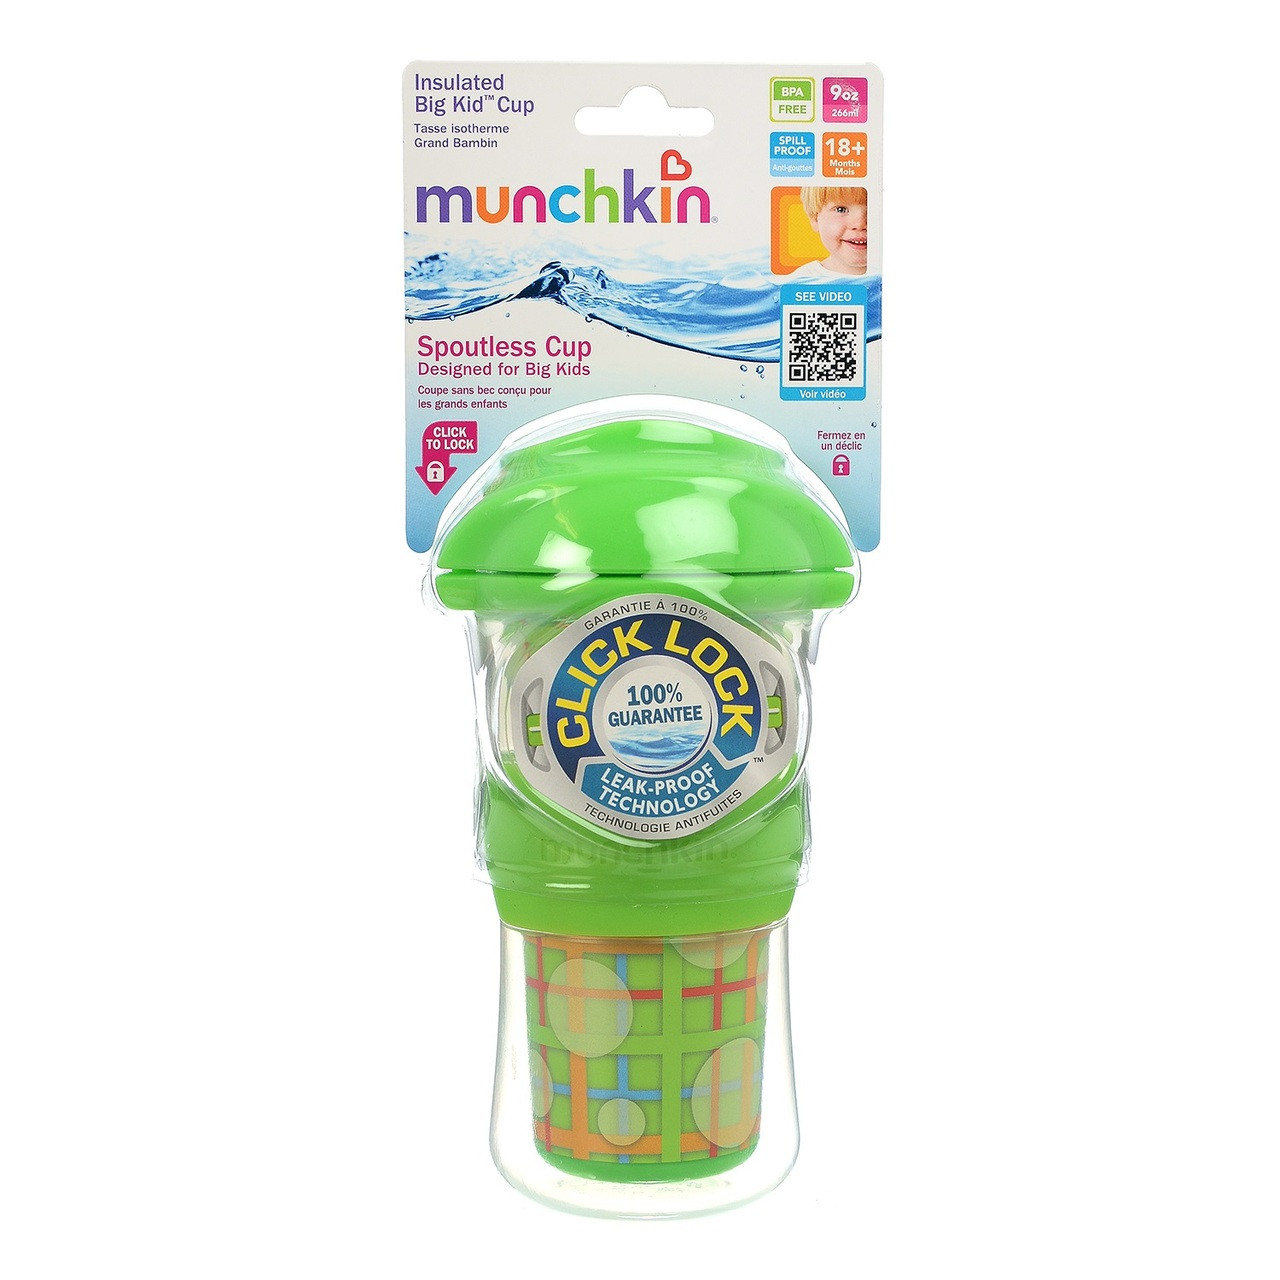 Munchkin Click Lock 9 OZ Insulated Straw Cup, Assorted Colors